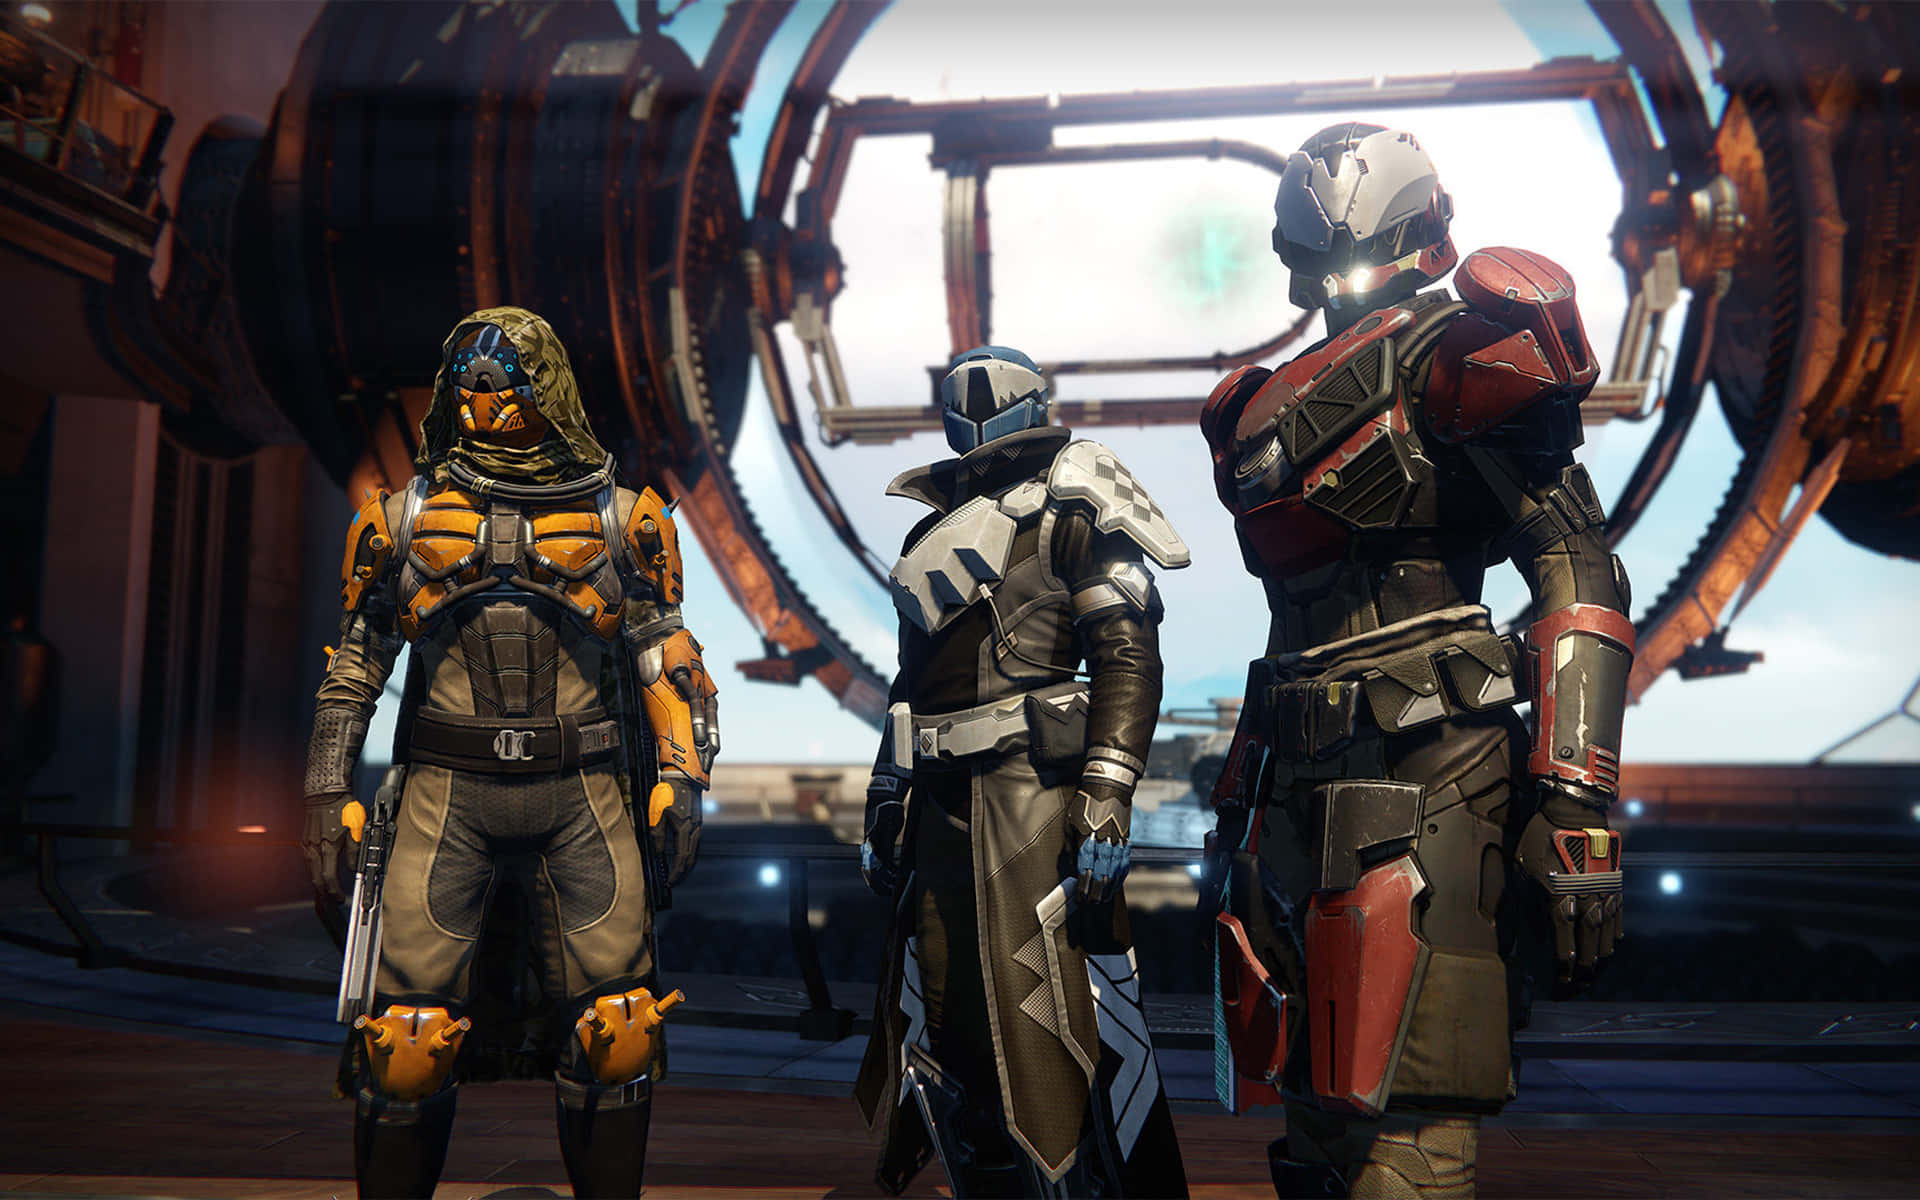 Guardians ready for battle – Characters from the game Destiny standing together in a vibrant scenery Wallpaper